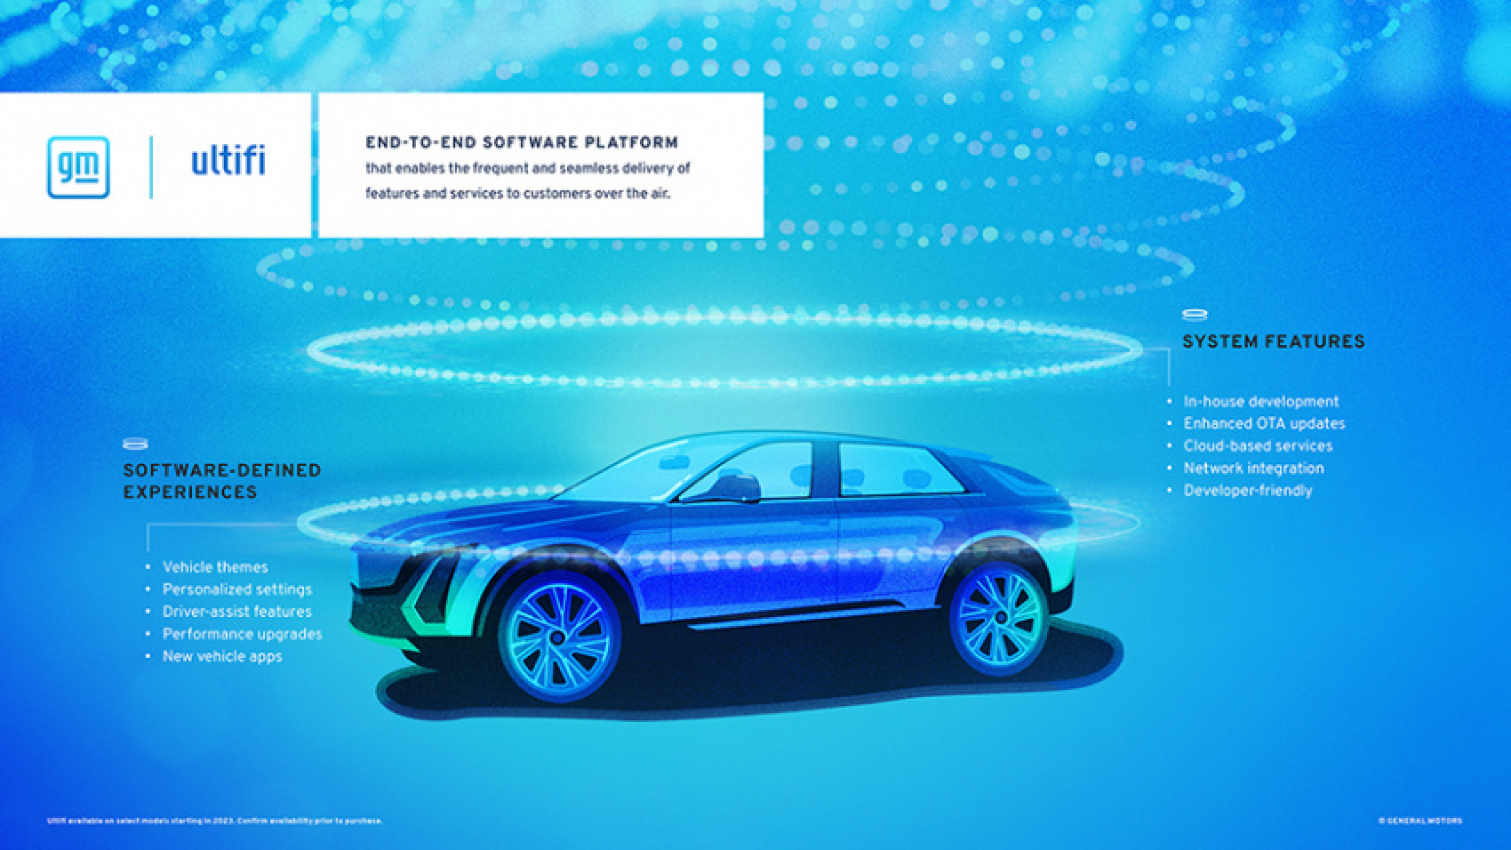 autos, cars, connectivity, connectivity, ultifi, general motors releases ultifi software platform promising “frequent and seamless” updates